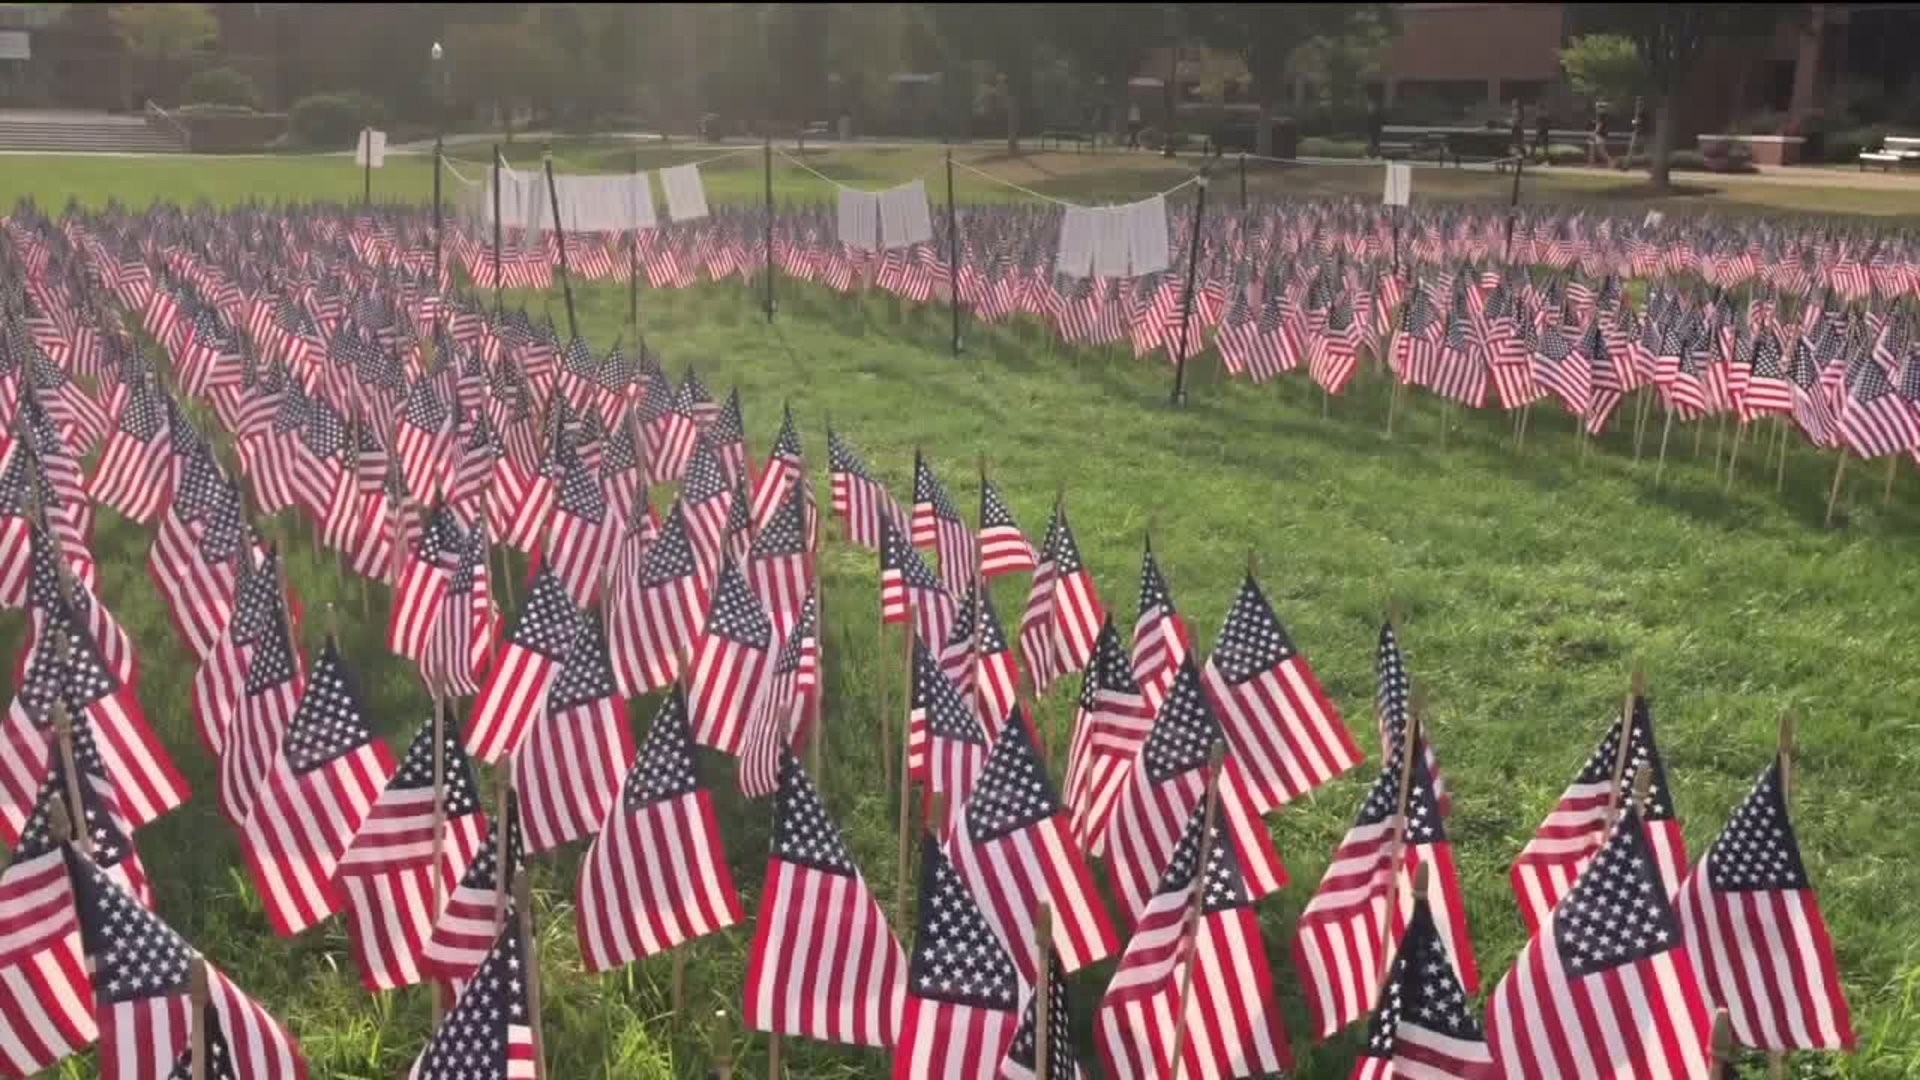 Bloomsburg University Set to Remember 9/11 on 18th Anniversary